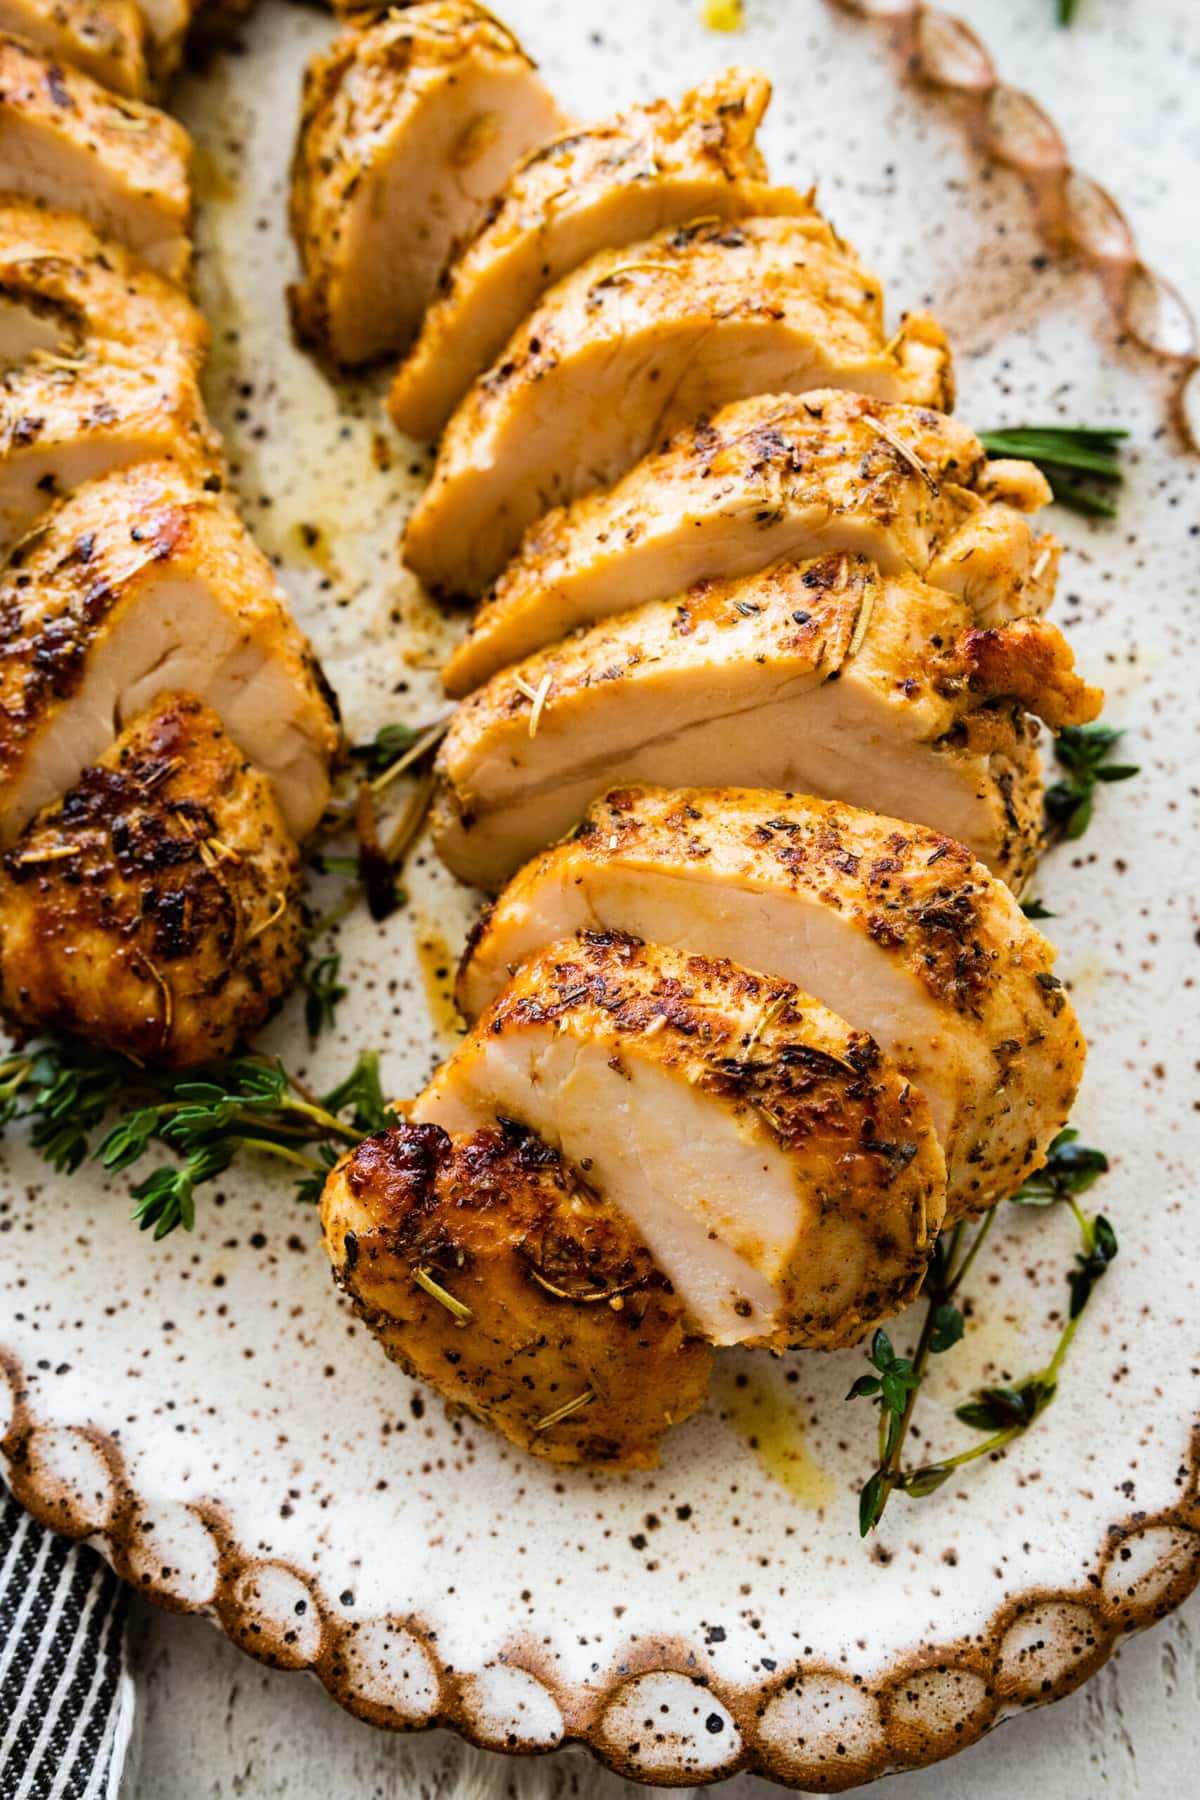 Baked Turkey tenderloin cut into slices on a platter with herbs all around it.